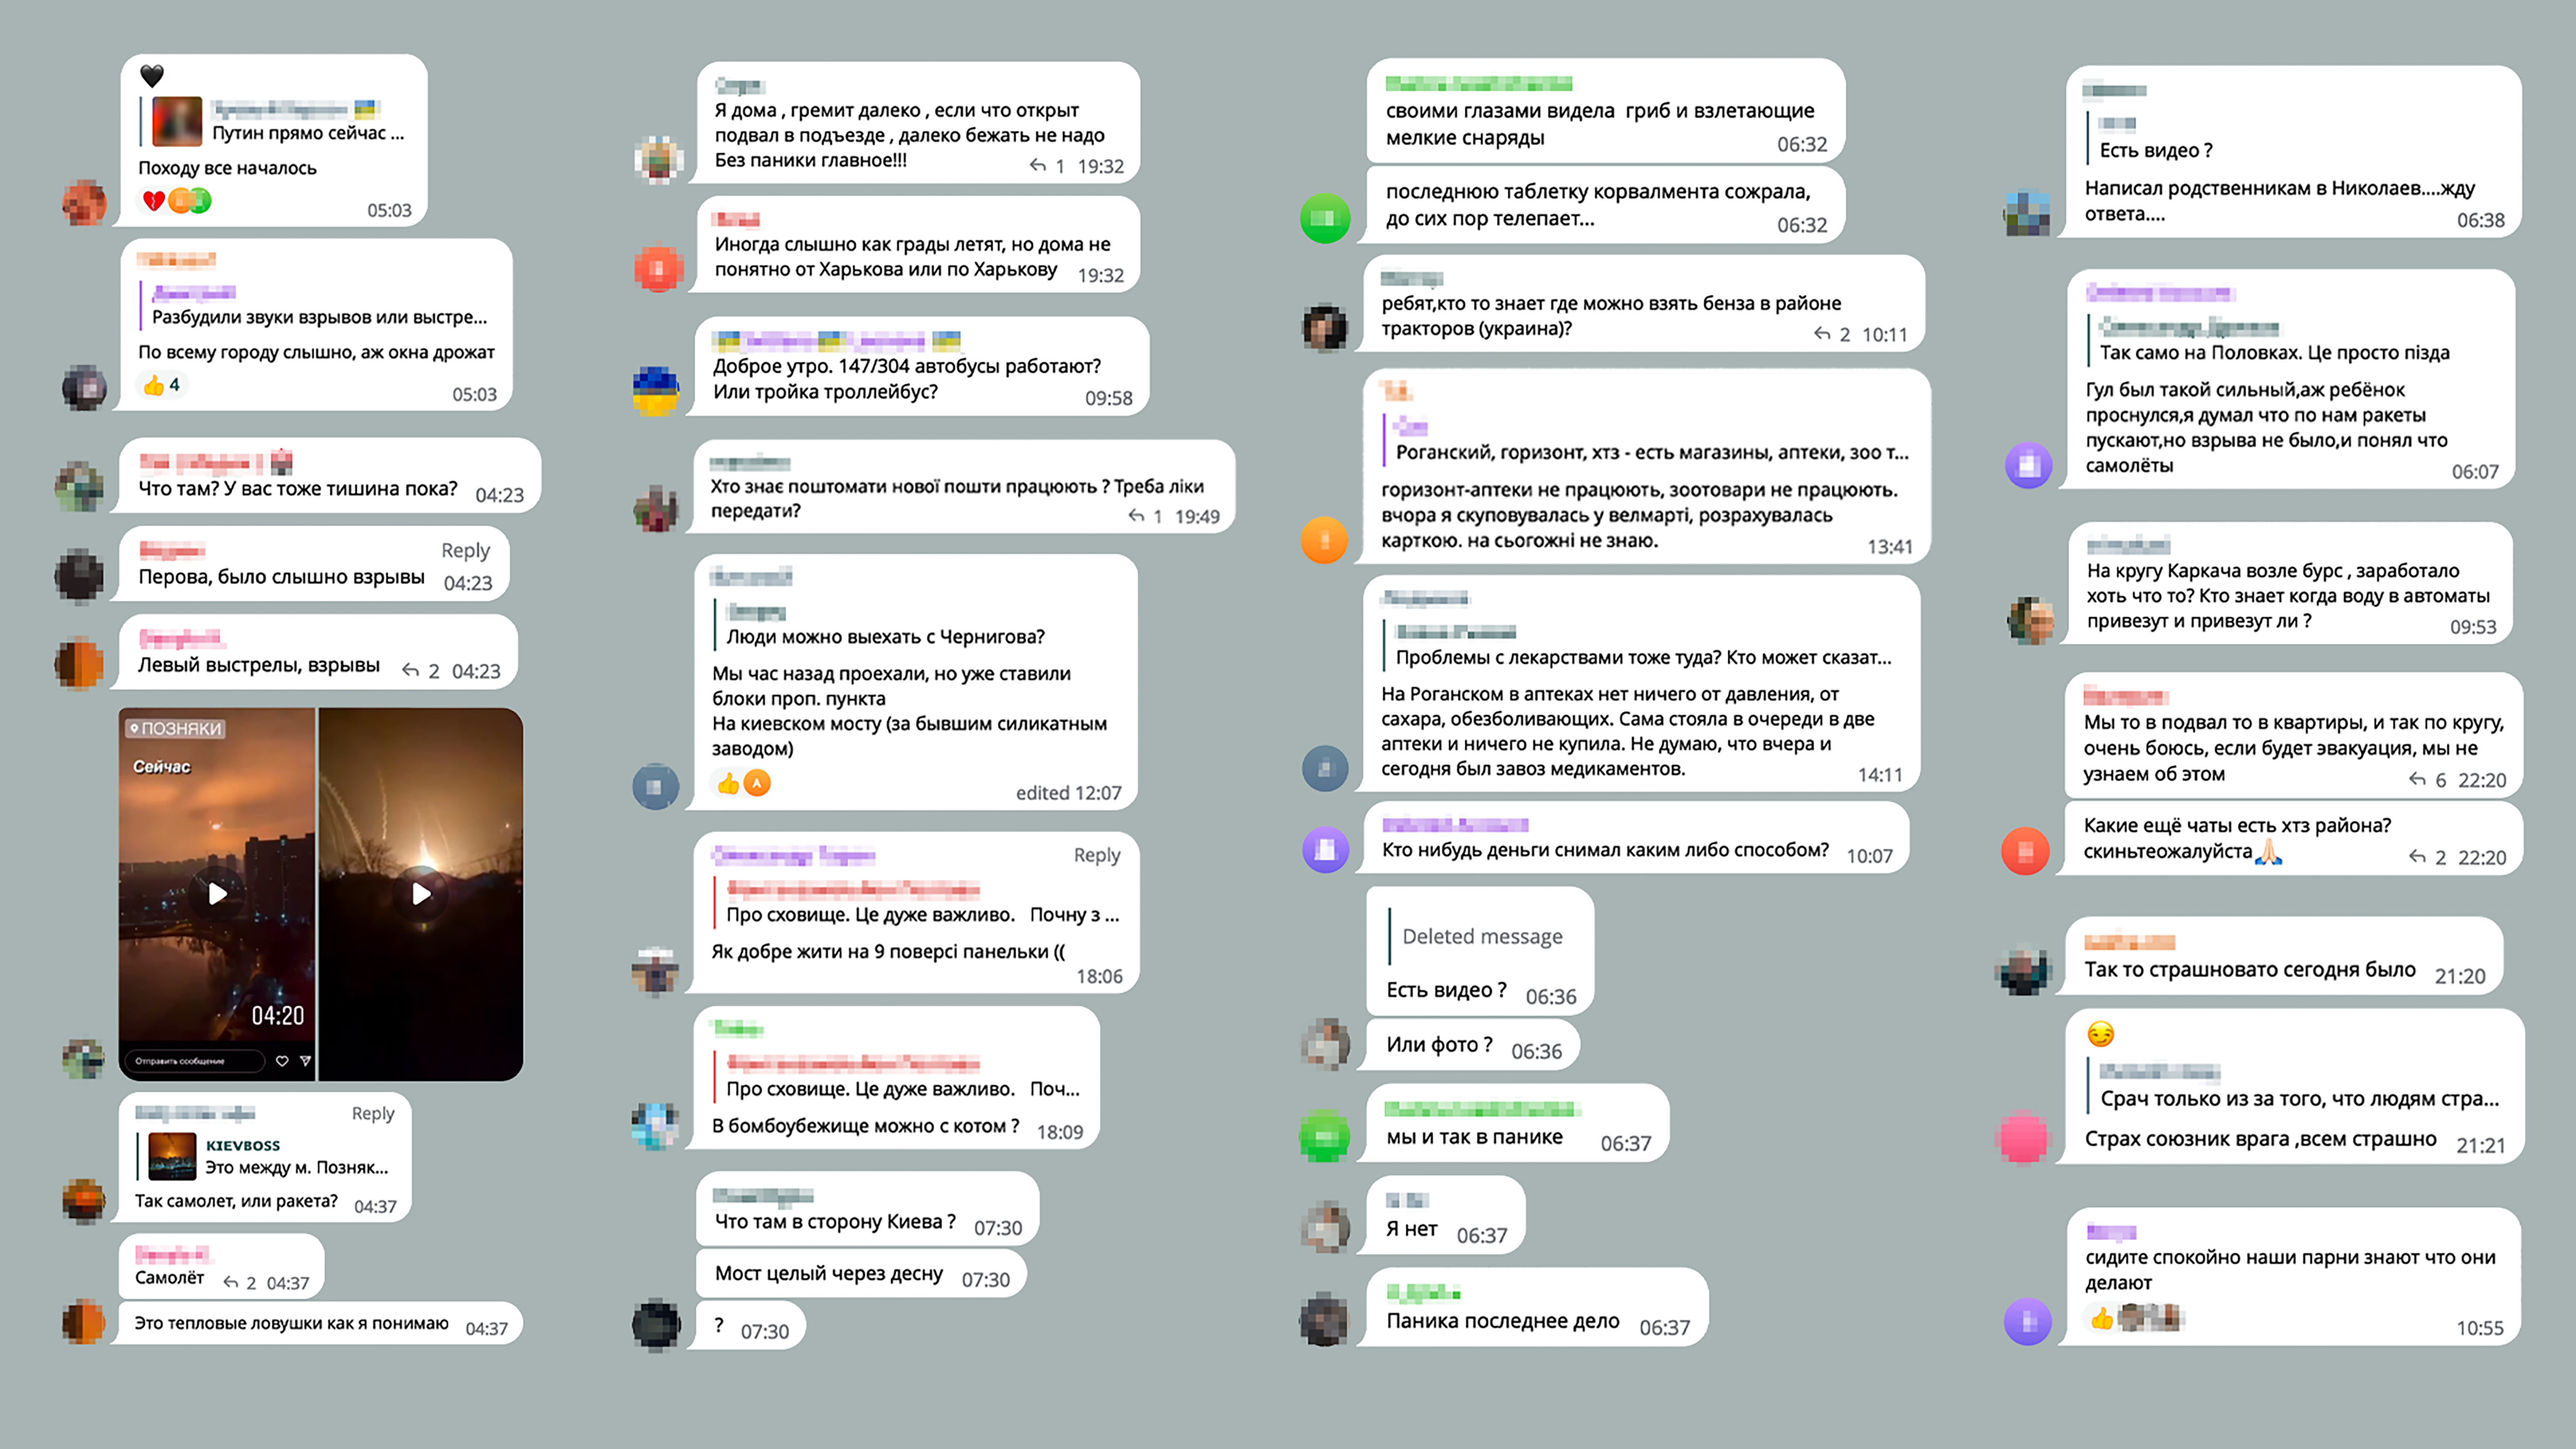 Panic of the first days of the war: Users discuss the situation in their locality or district, exchange info on the working hours of groceries, pharmacies, etc. <br />Dokumentarische Praktiken in Telegram-Chats<br />(© Center for Urban History of East Central Europe)